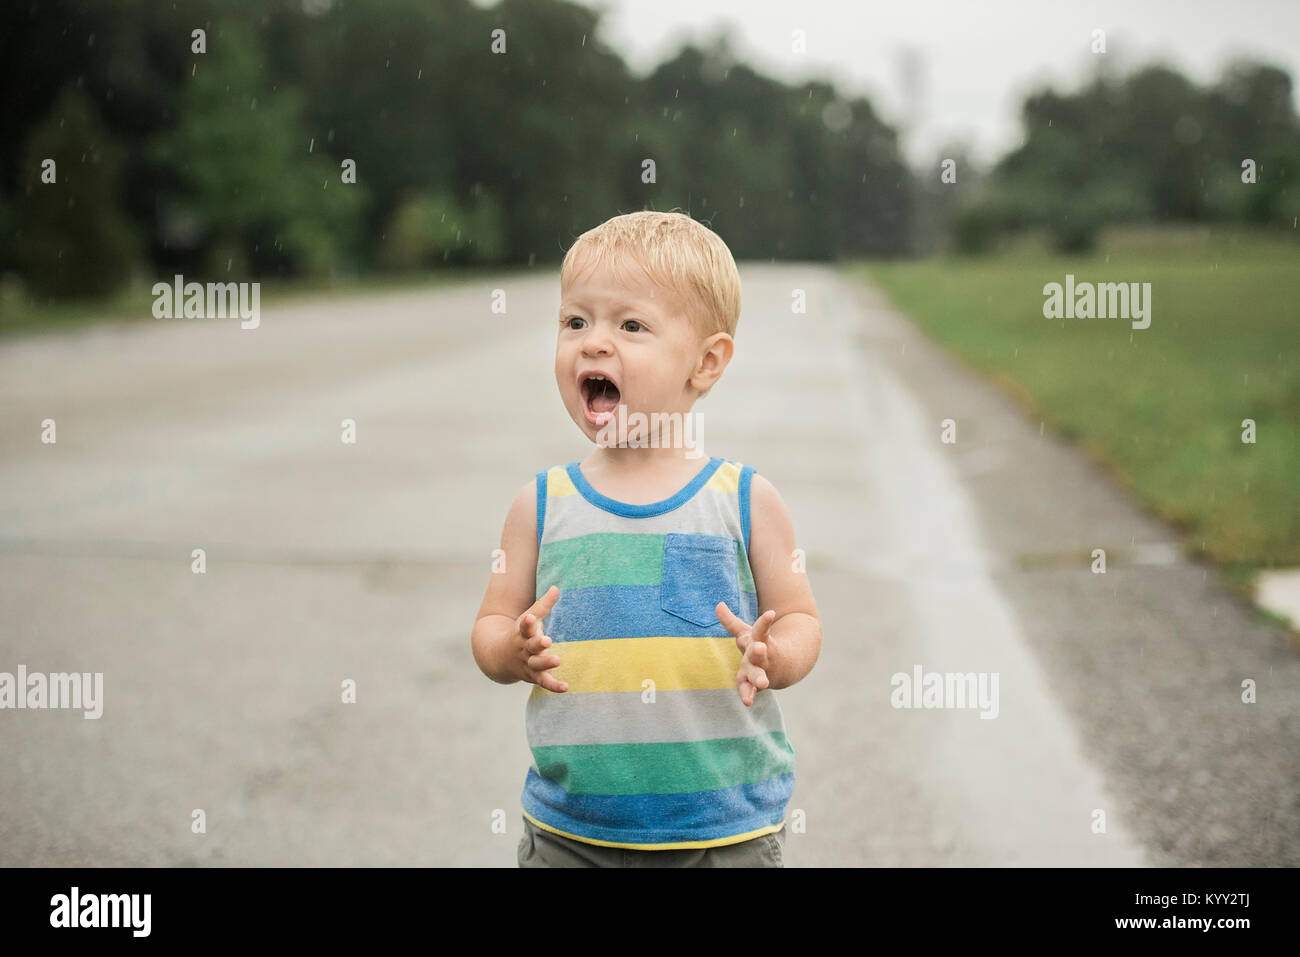 Cute boy shouting while looking away during rainfall on road Stock Photo